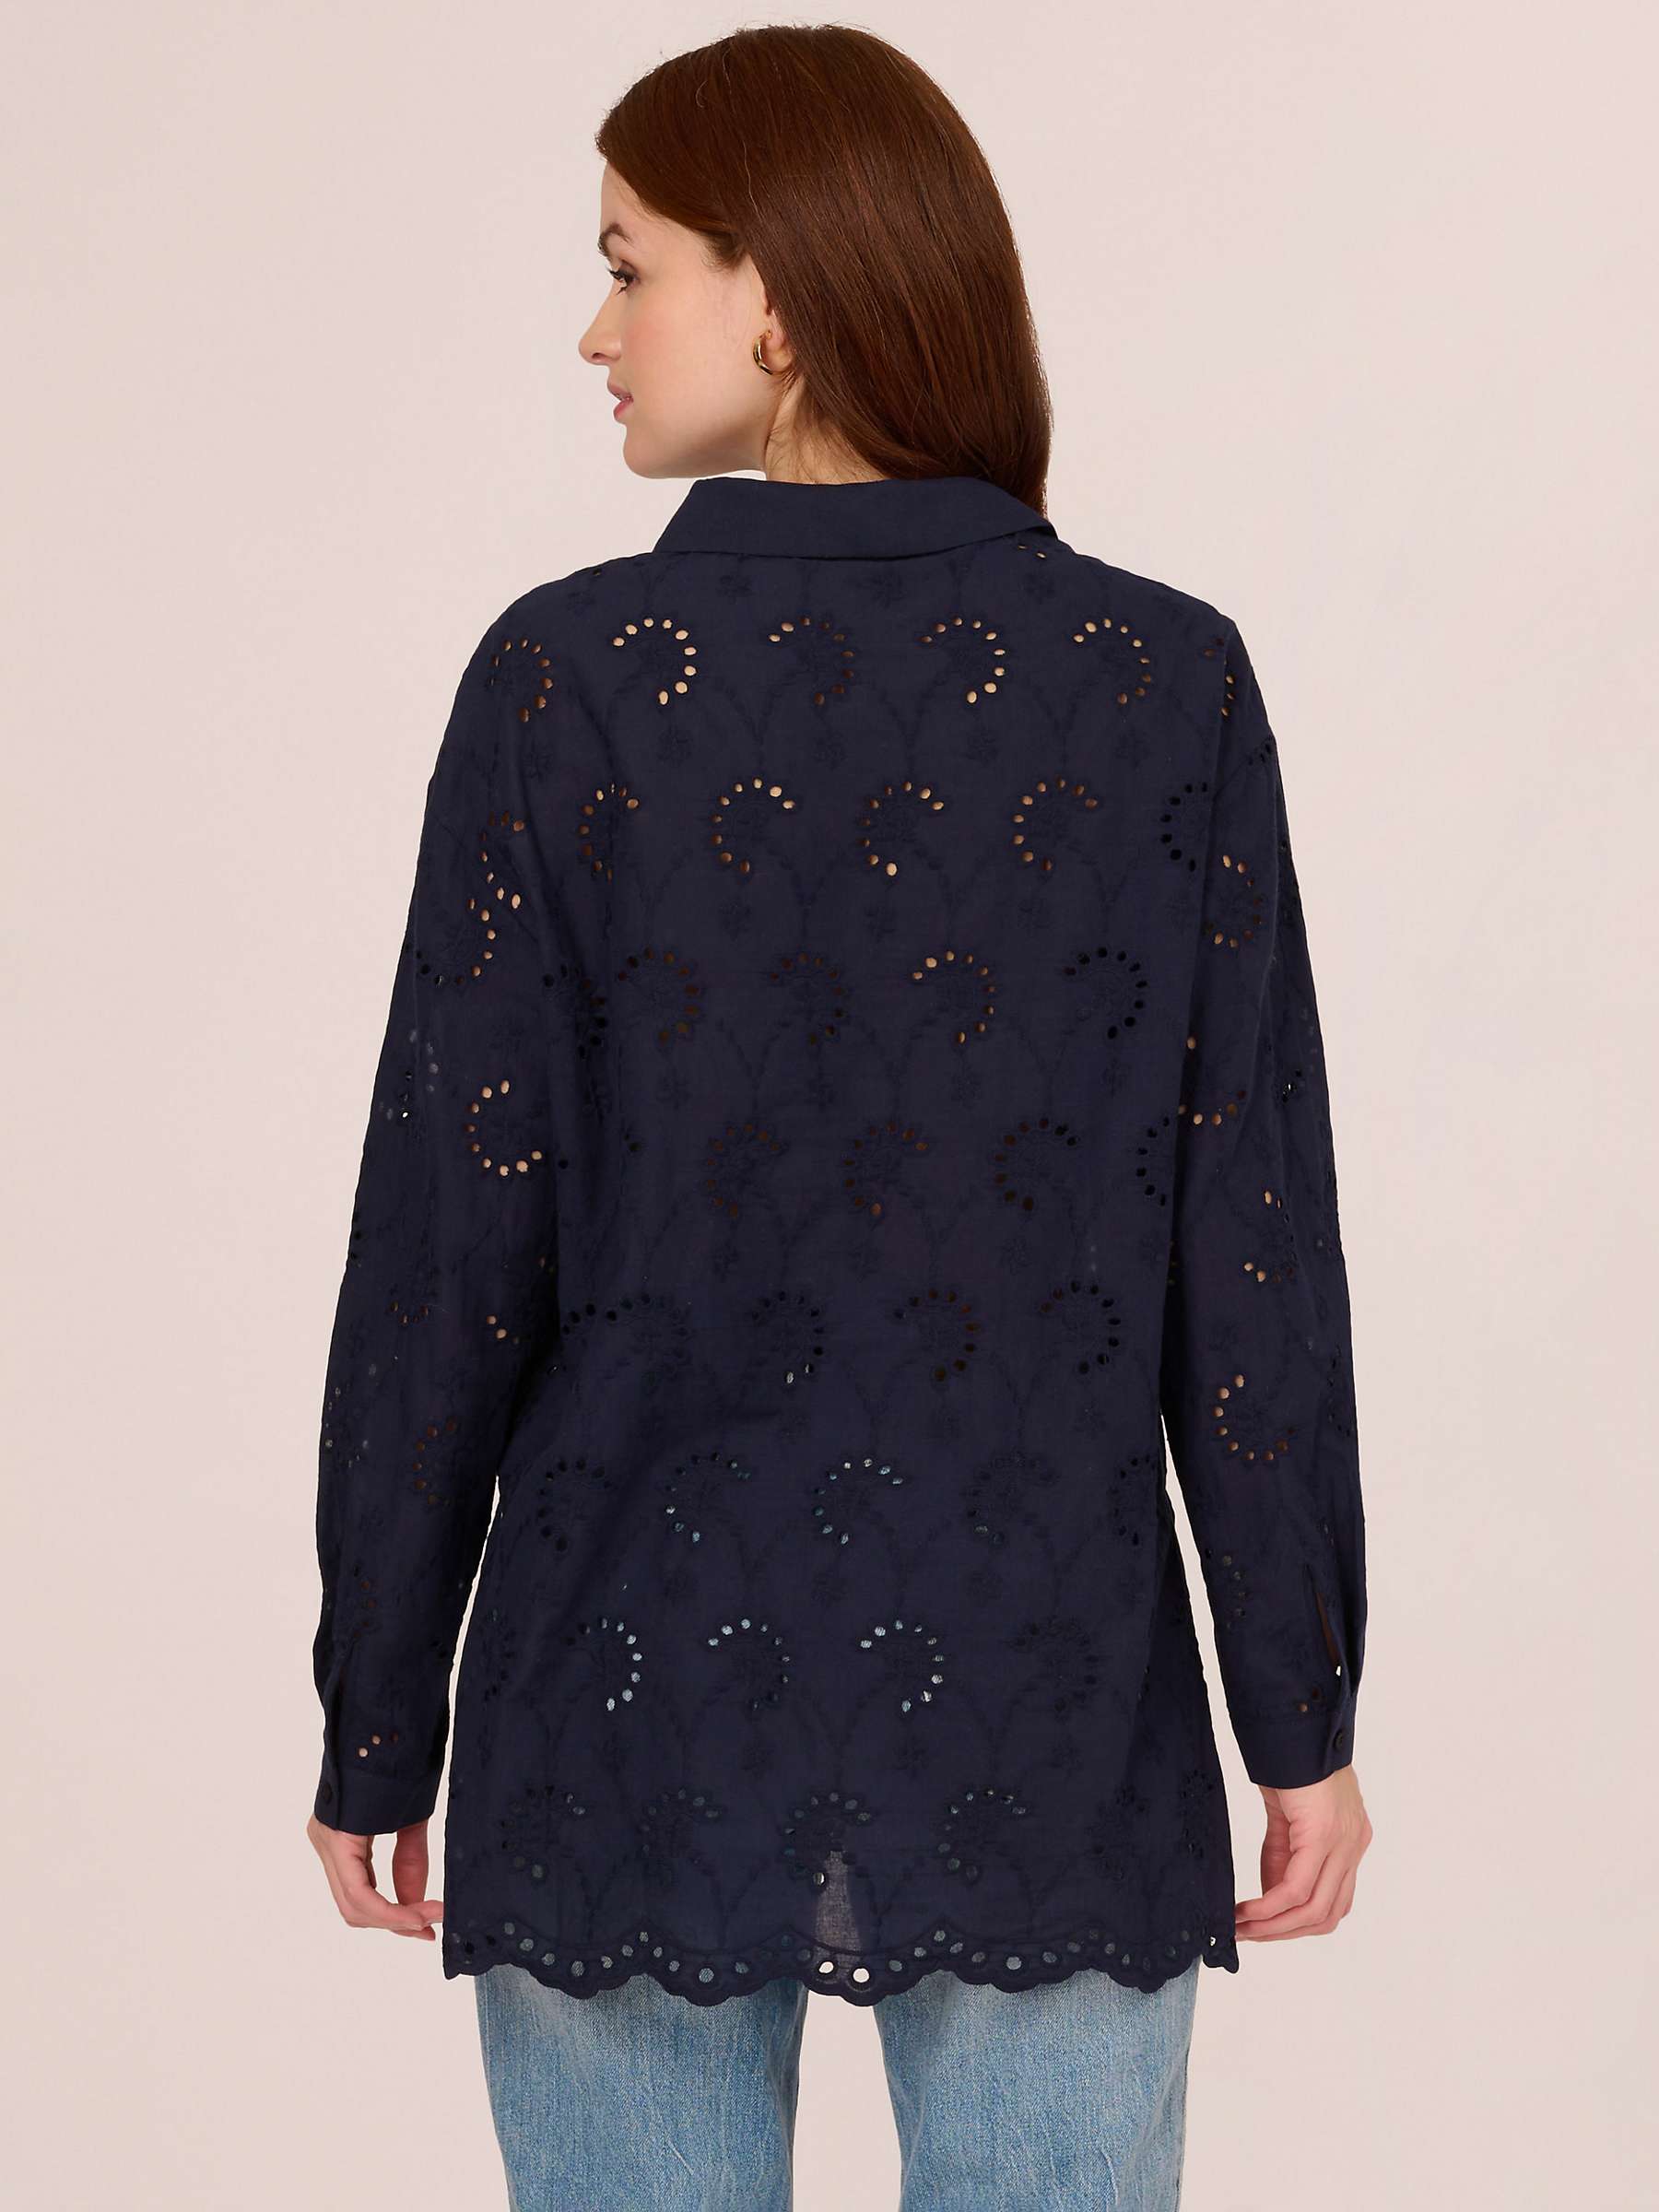 Buy Adrianna Papell Eyelet Button Front Tunic Blouse, Navy Online at johnlewis.com